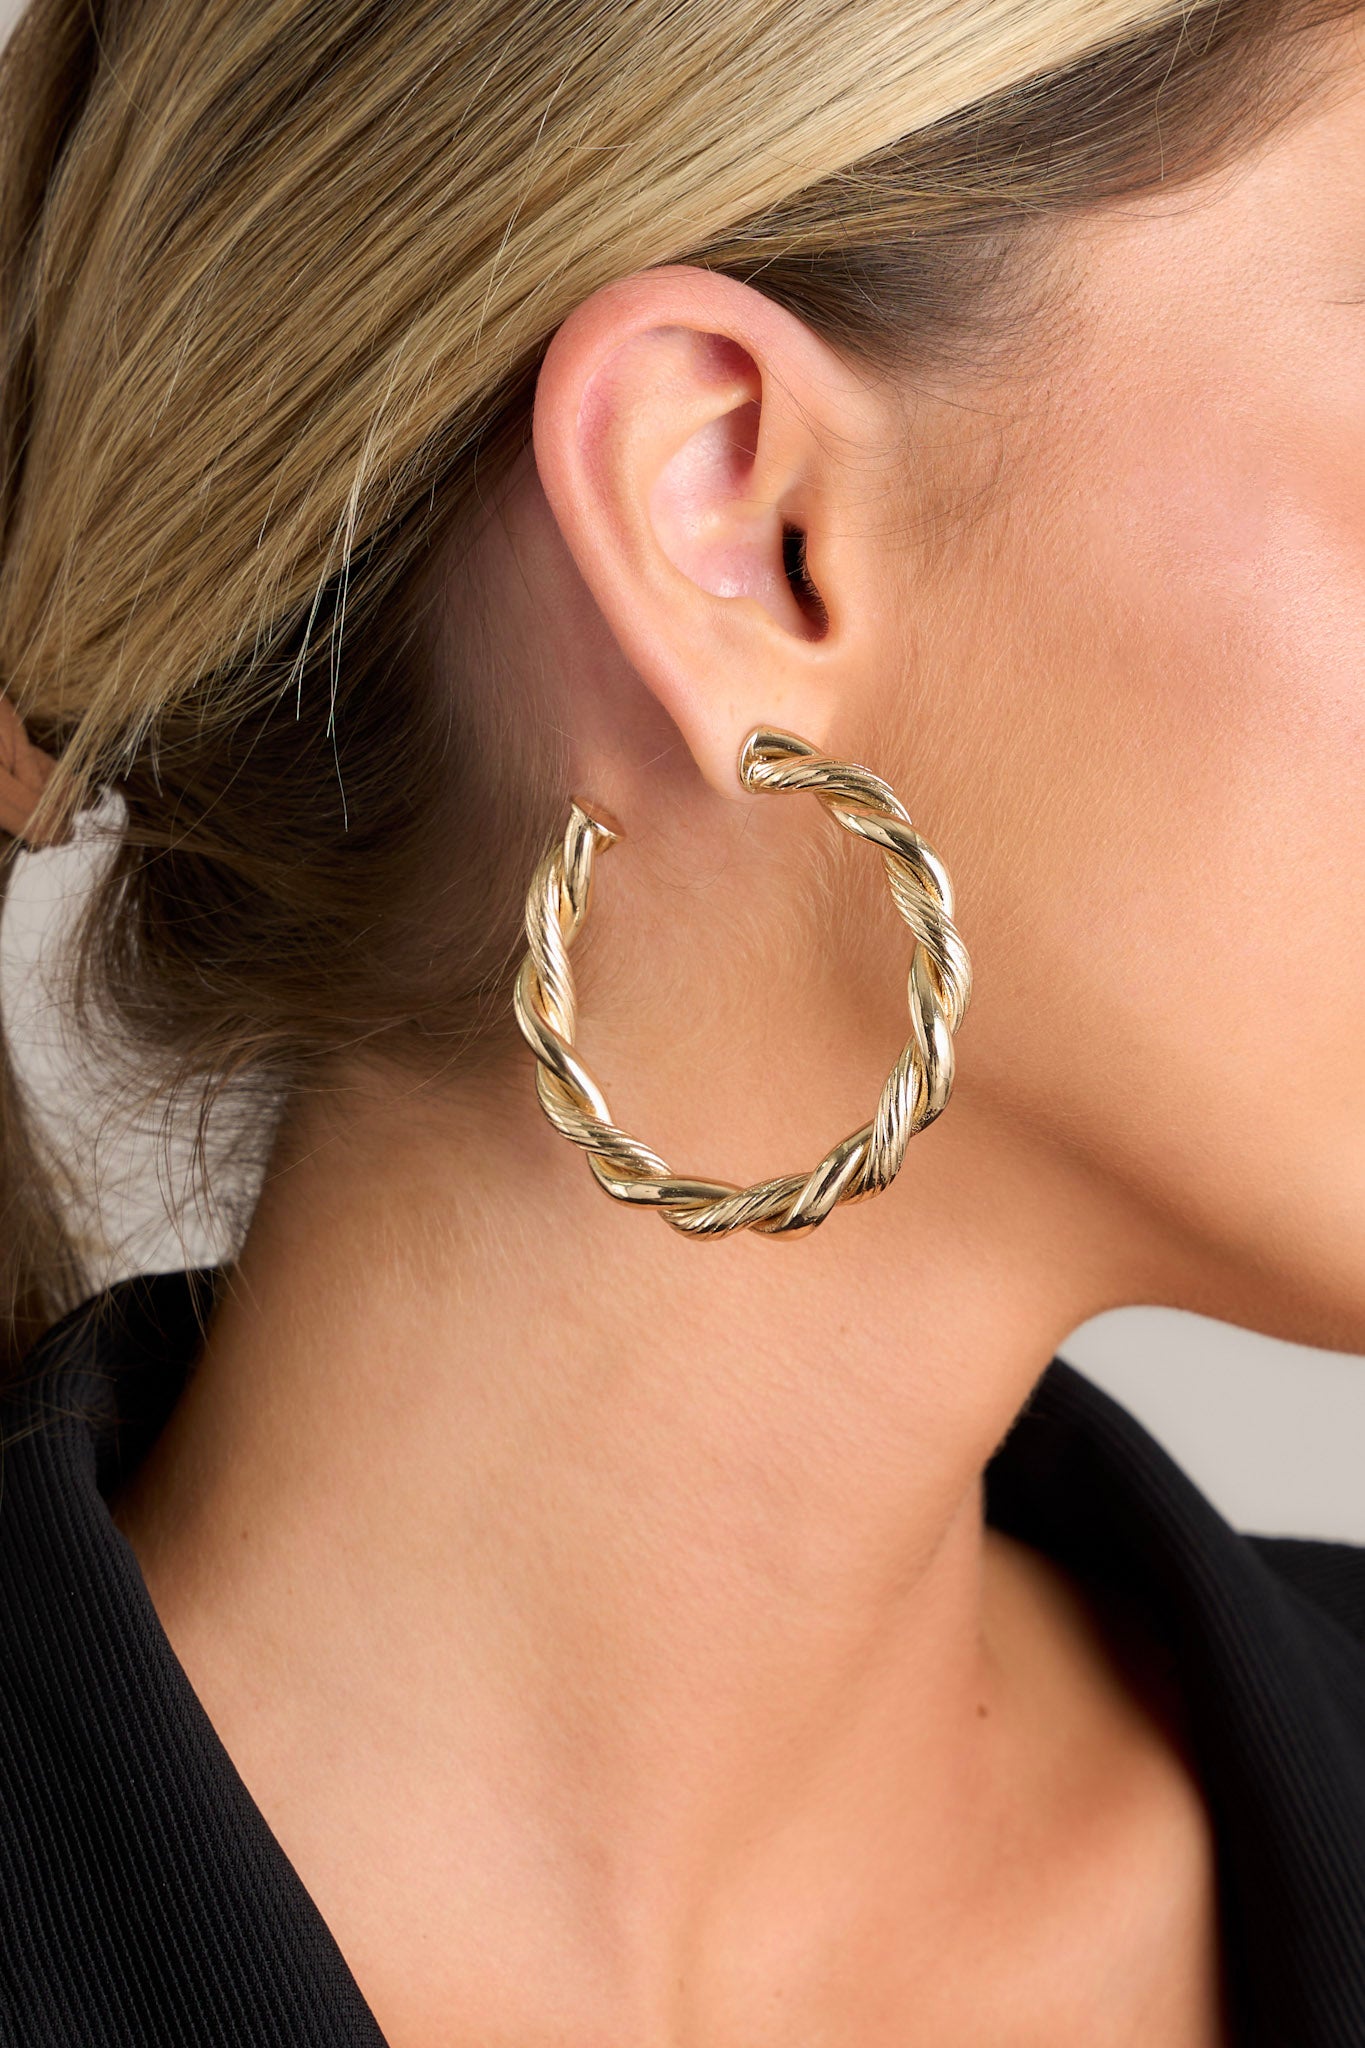 Close-up view of these gold earrings that feature an incomplete hoop design, a textured twisted design, and secure post backings.